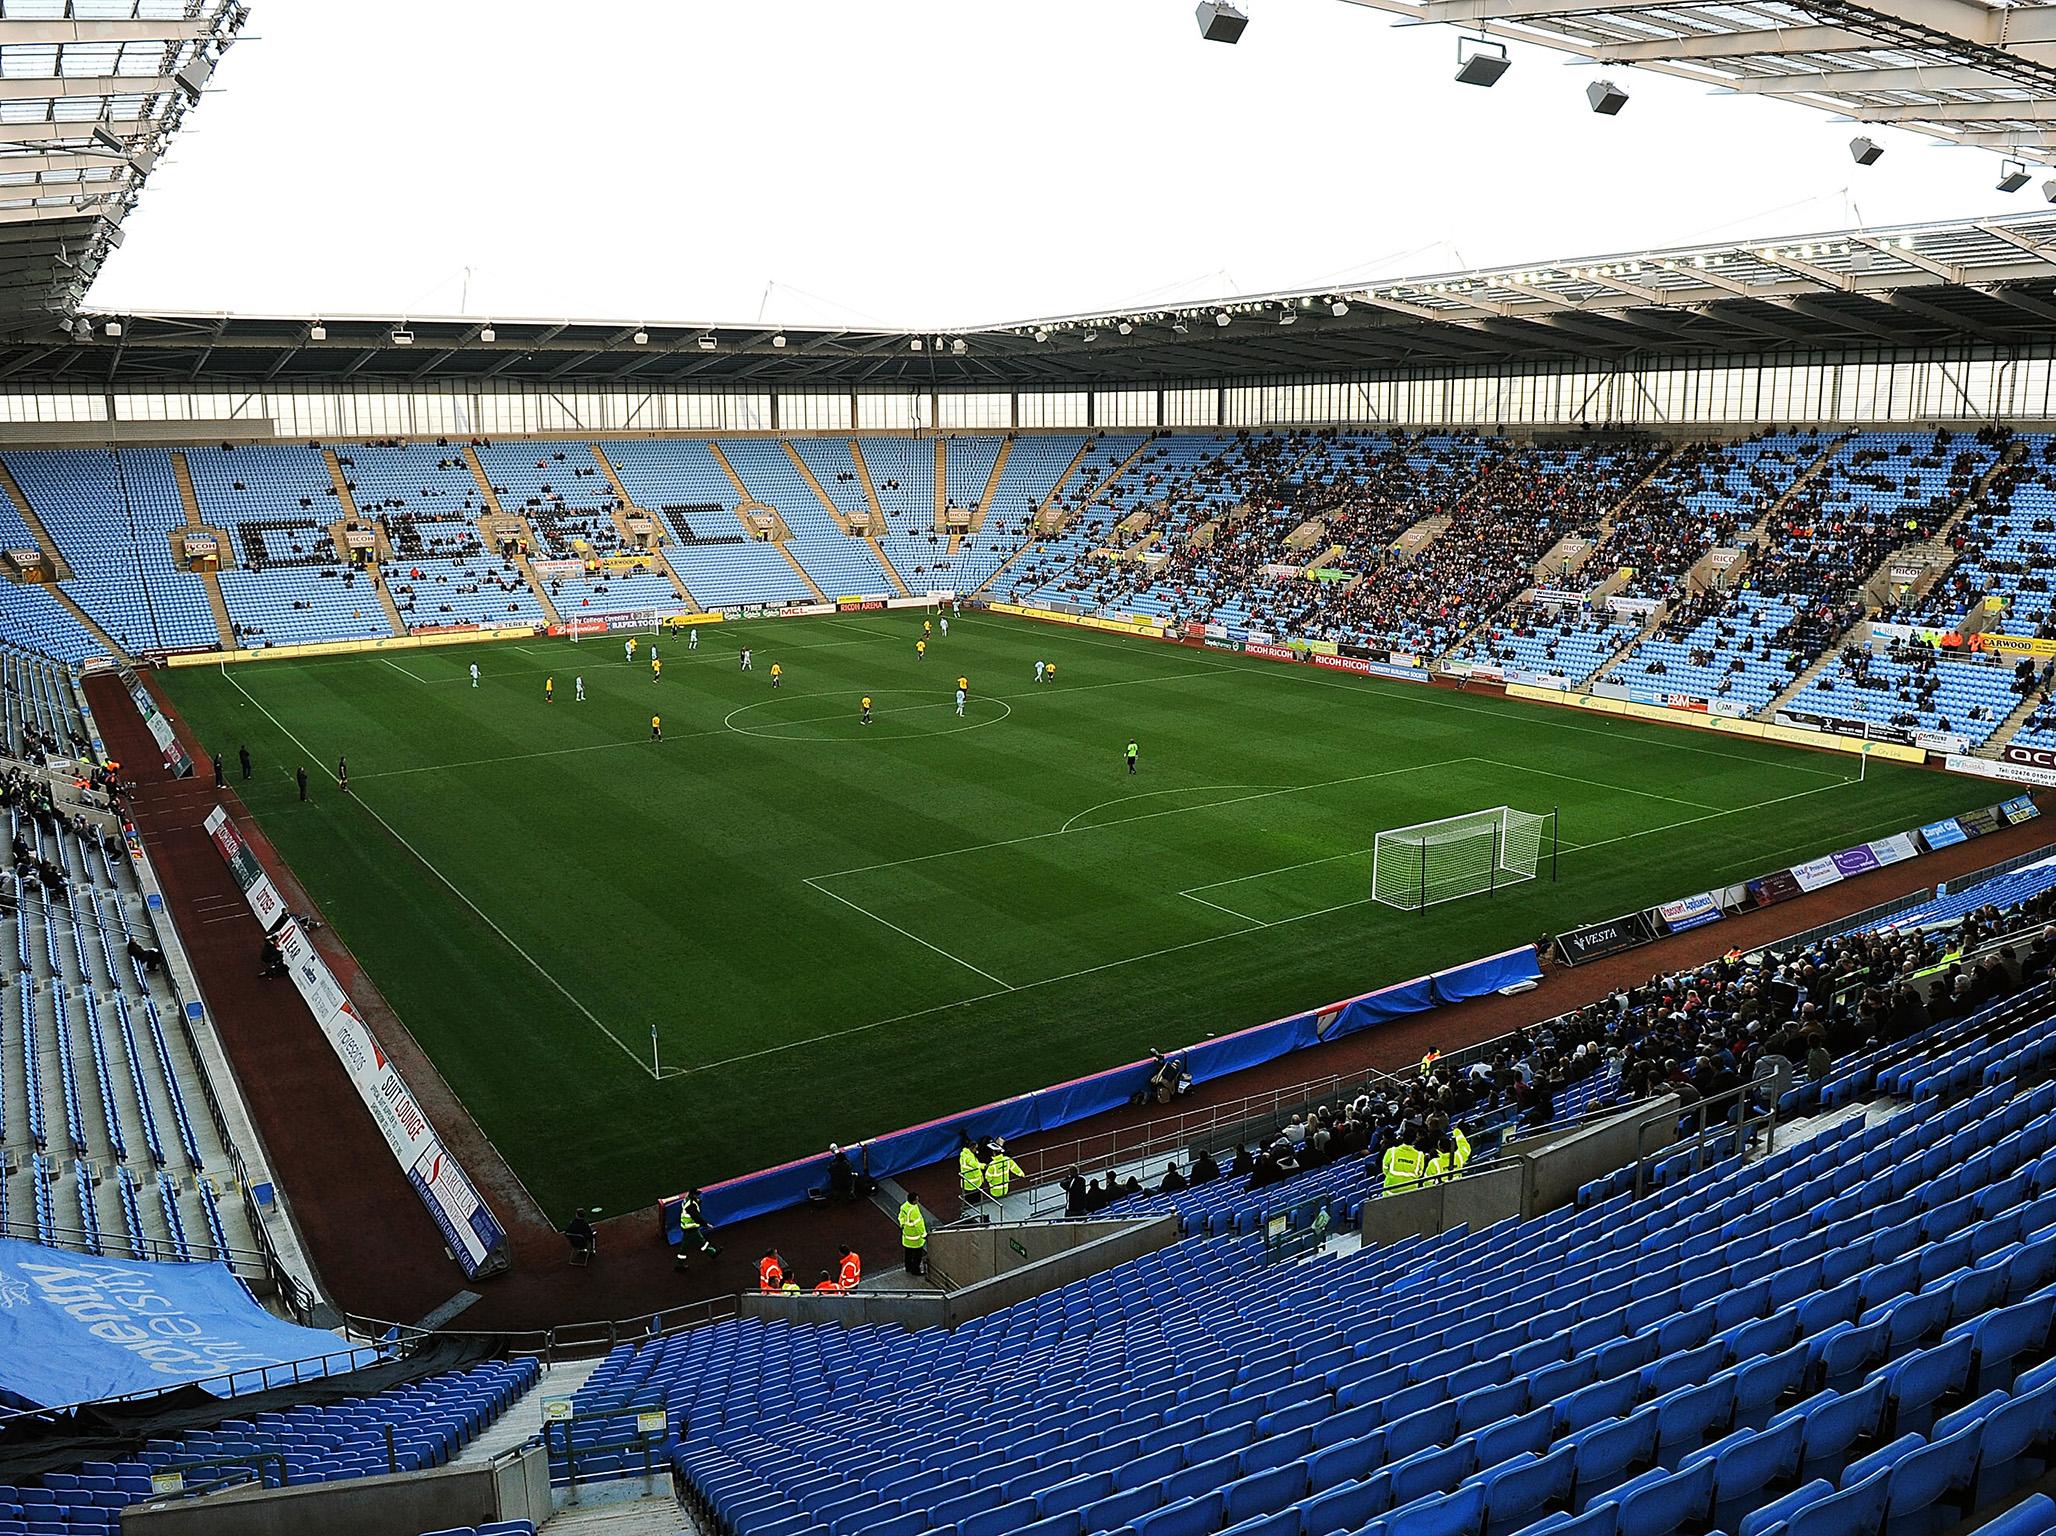 Coventry play at the Ricoh Arena in front of crowds of around 7,000 fans